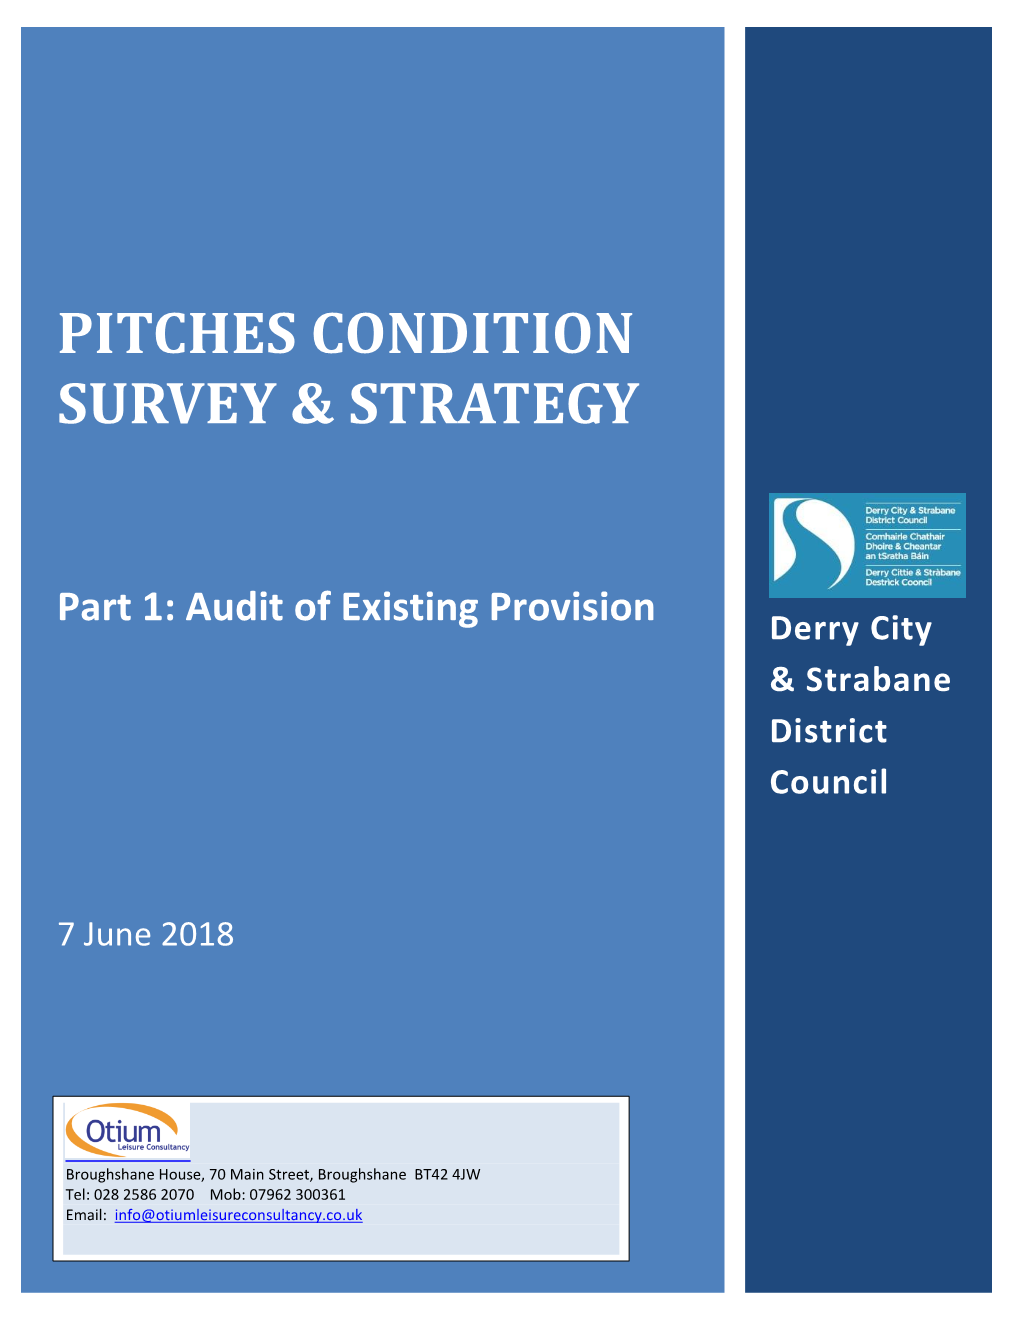 Pitches Condition Survey & Strategy